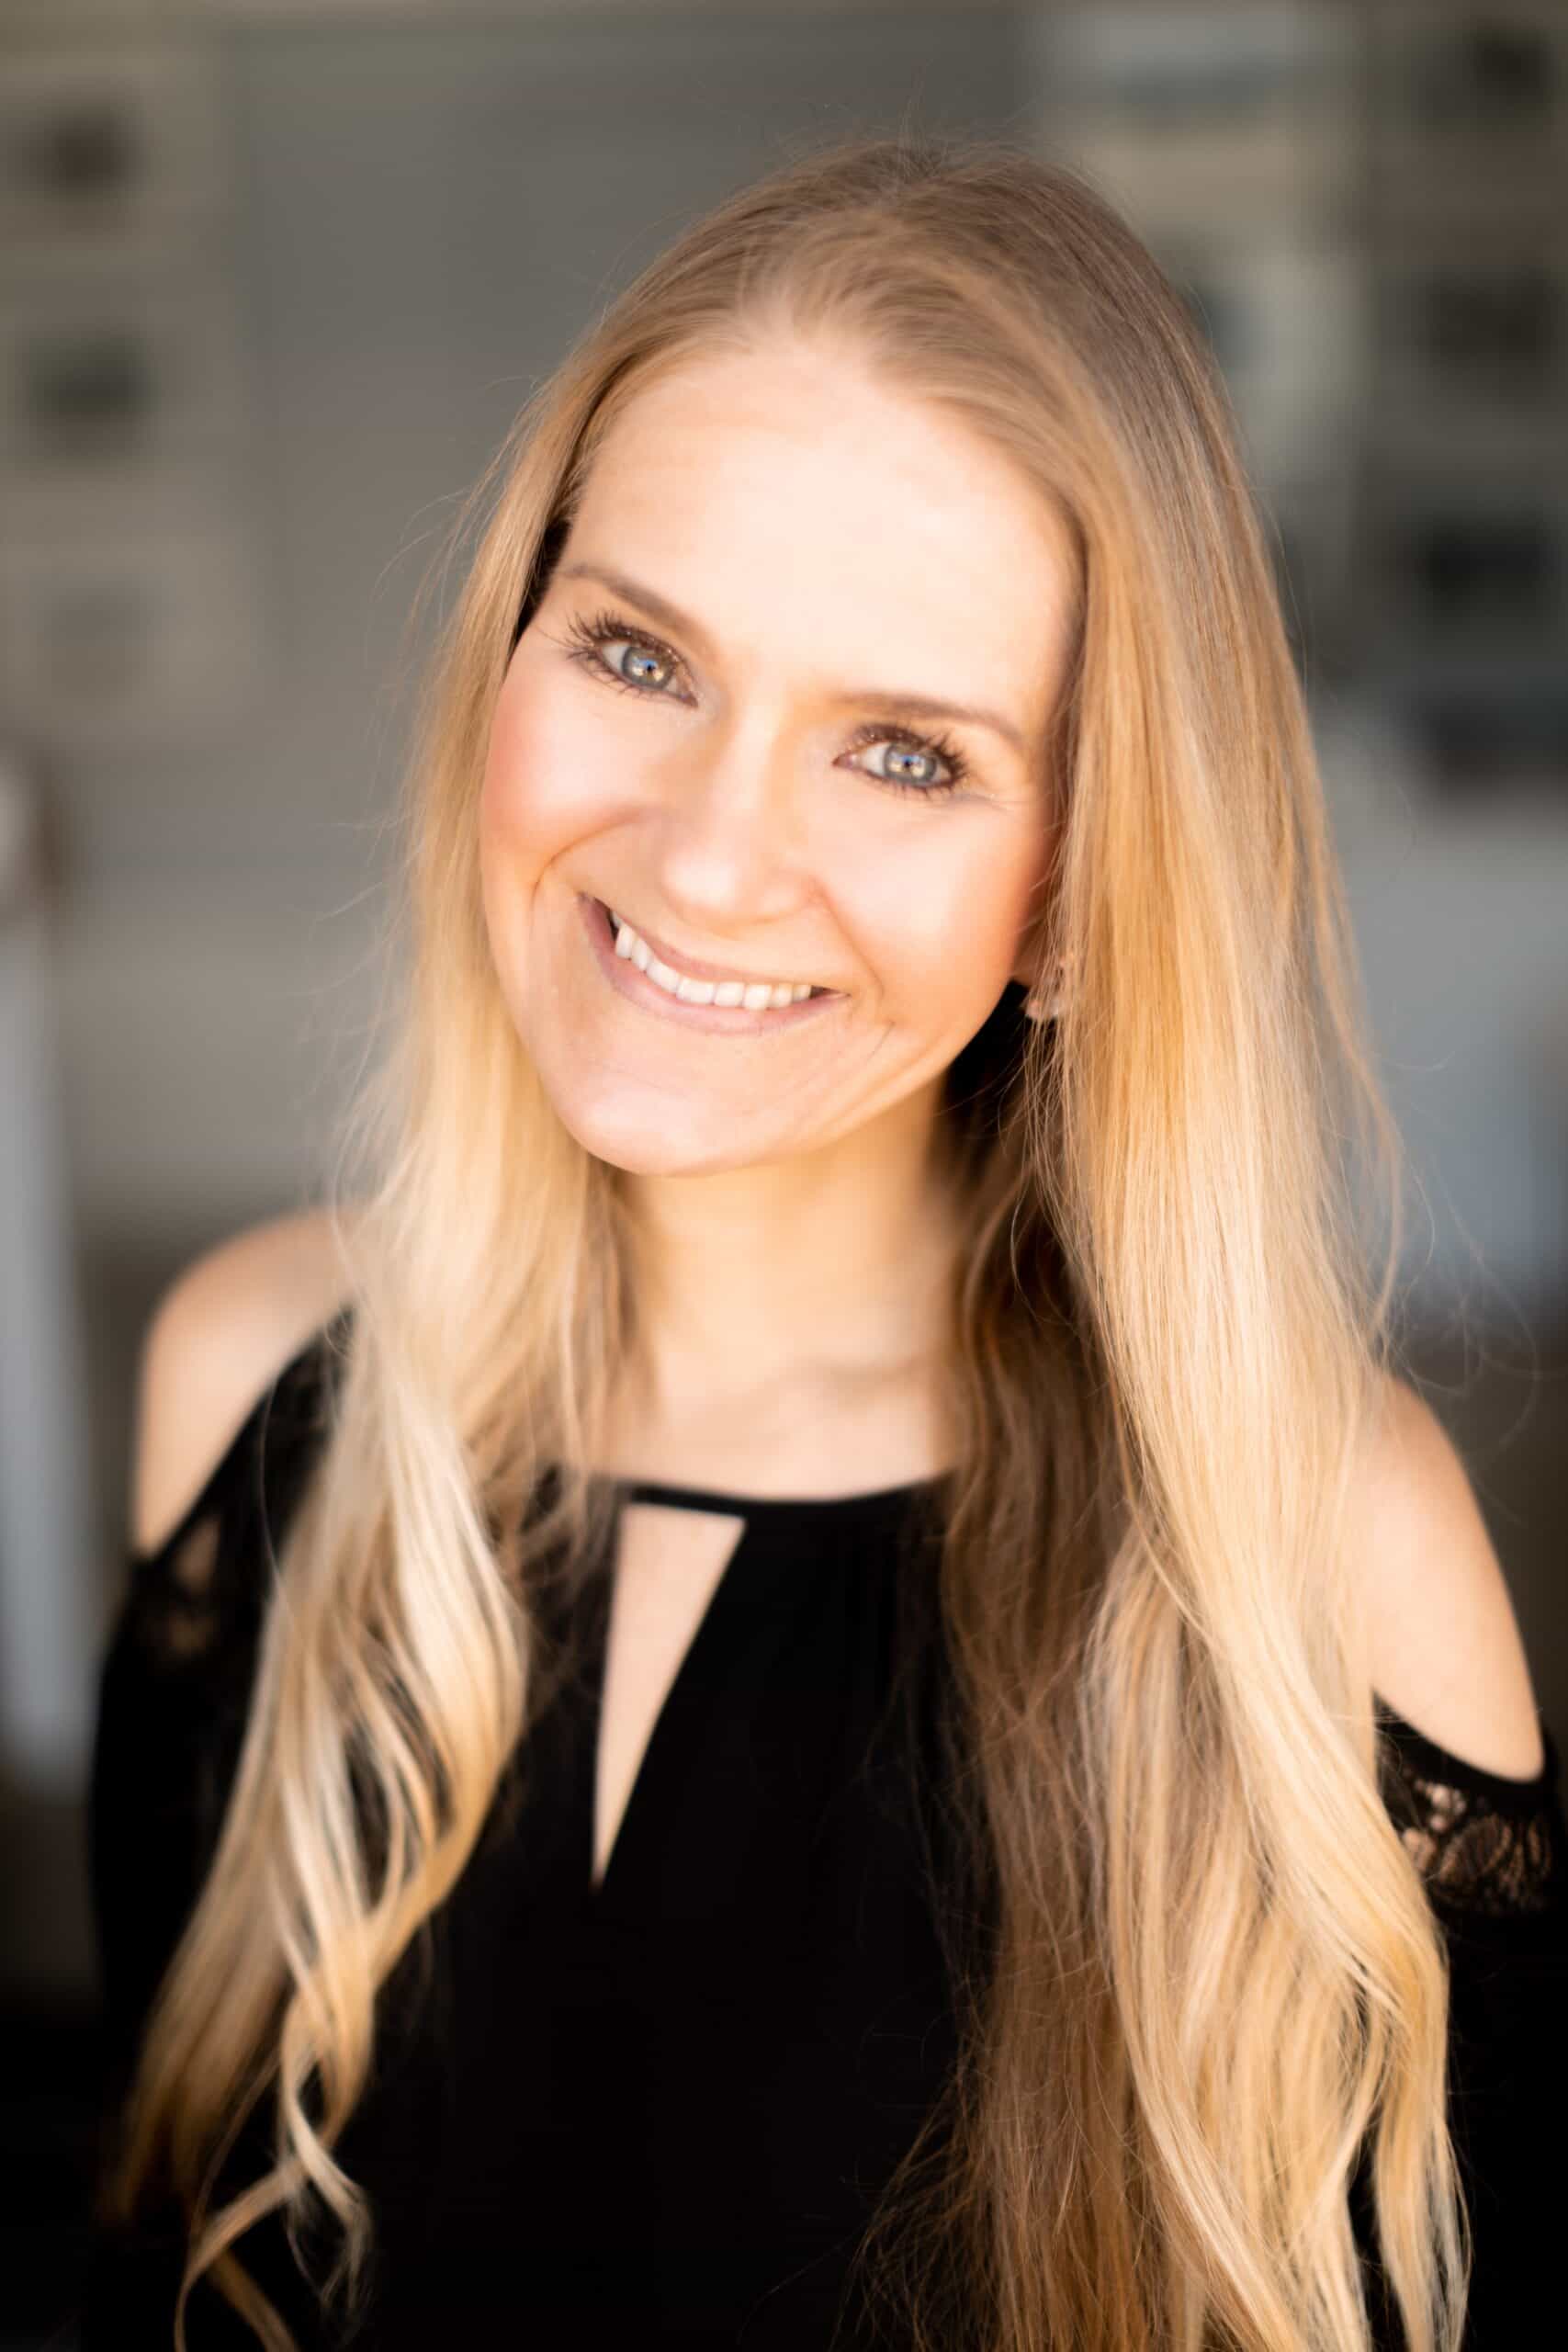 Christine Schroeter headshot showing her with long blonde hair smiling for the camera.